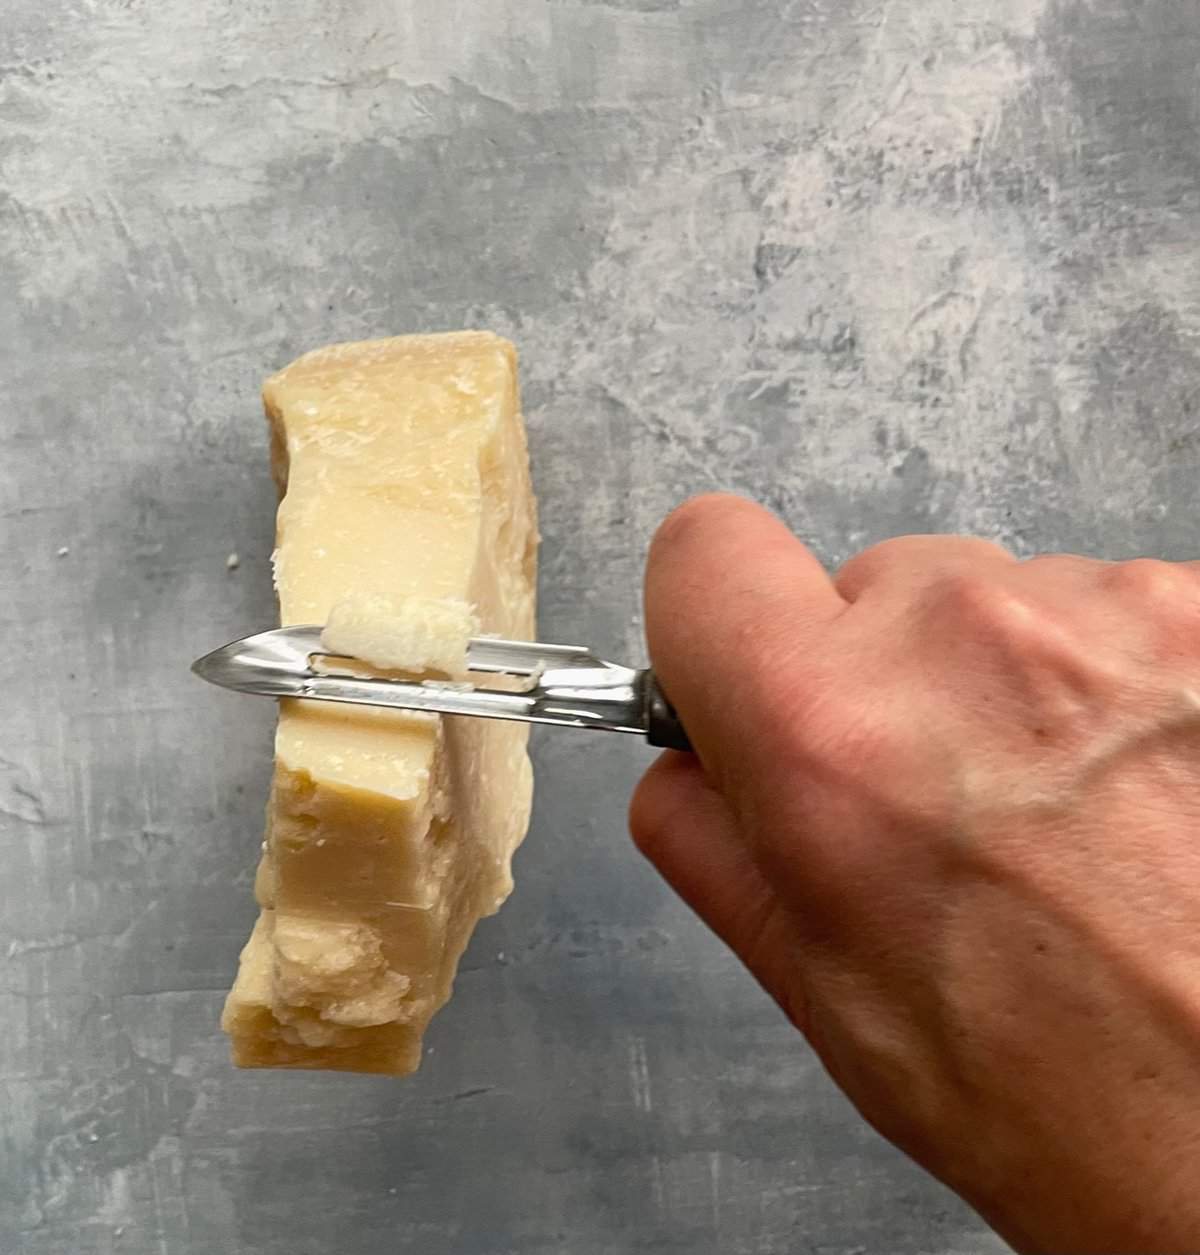 making Parmesan curls with a block of Parmesan and vegetable peeler.